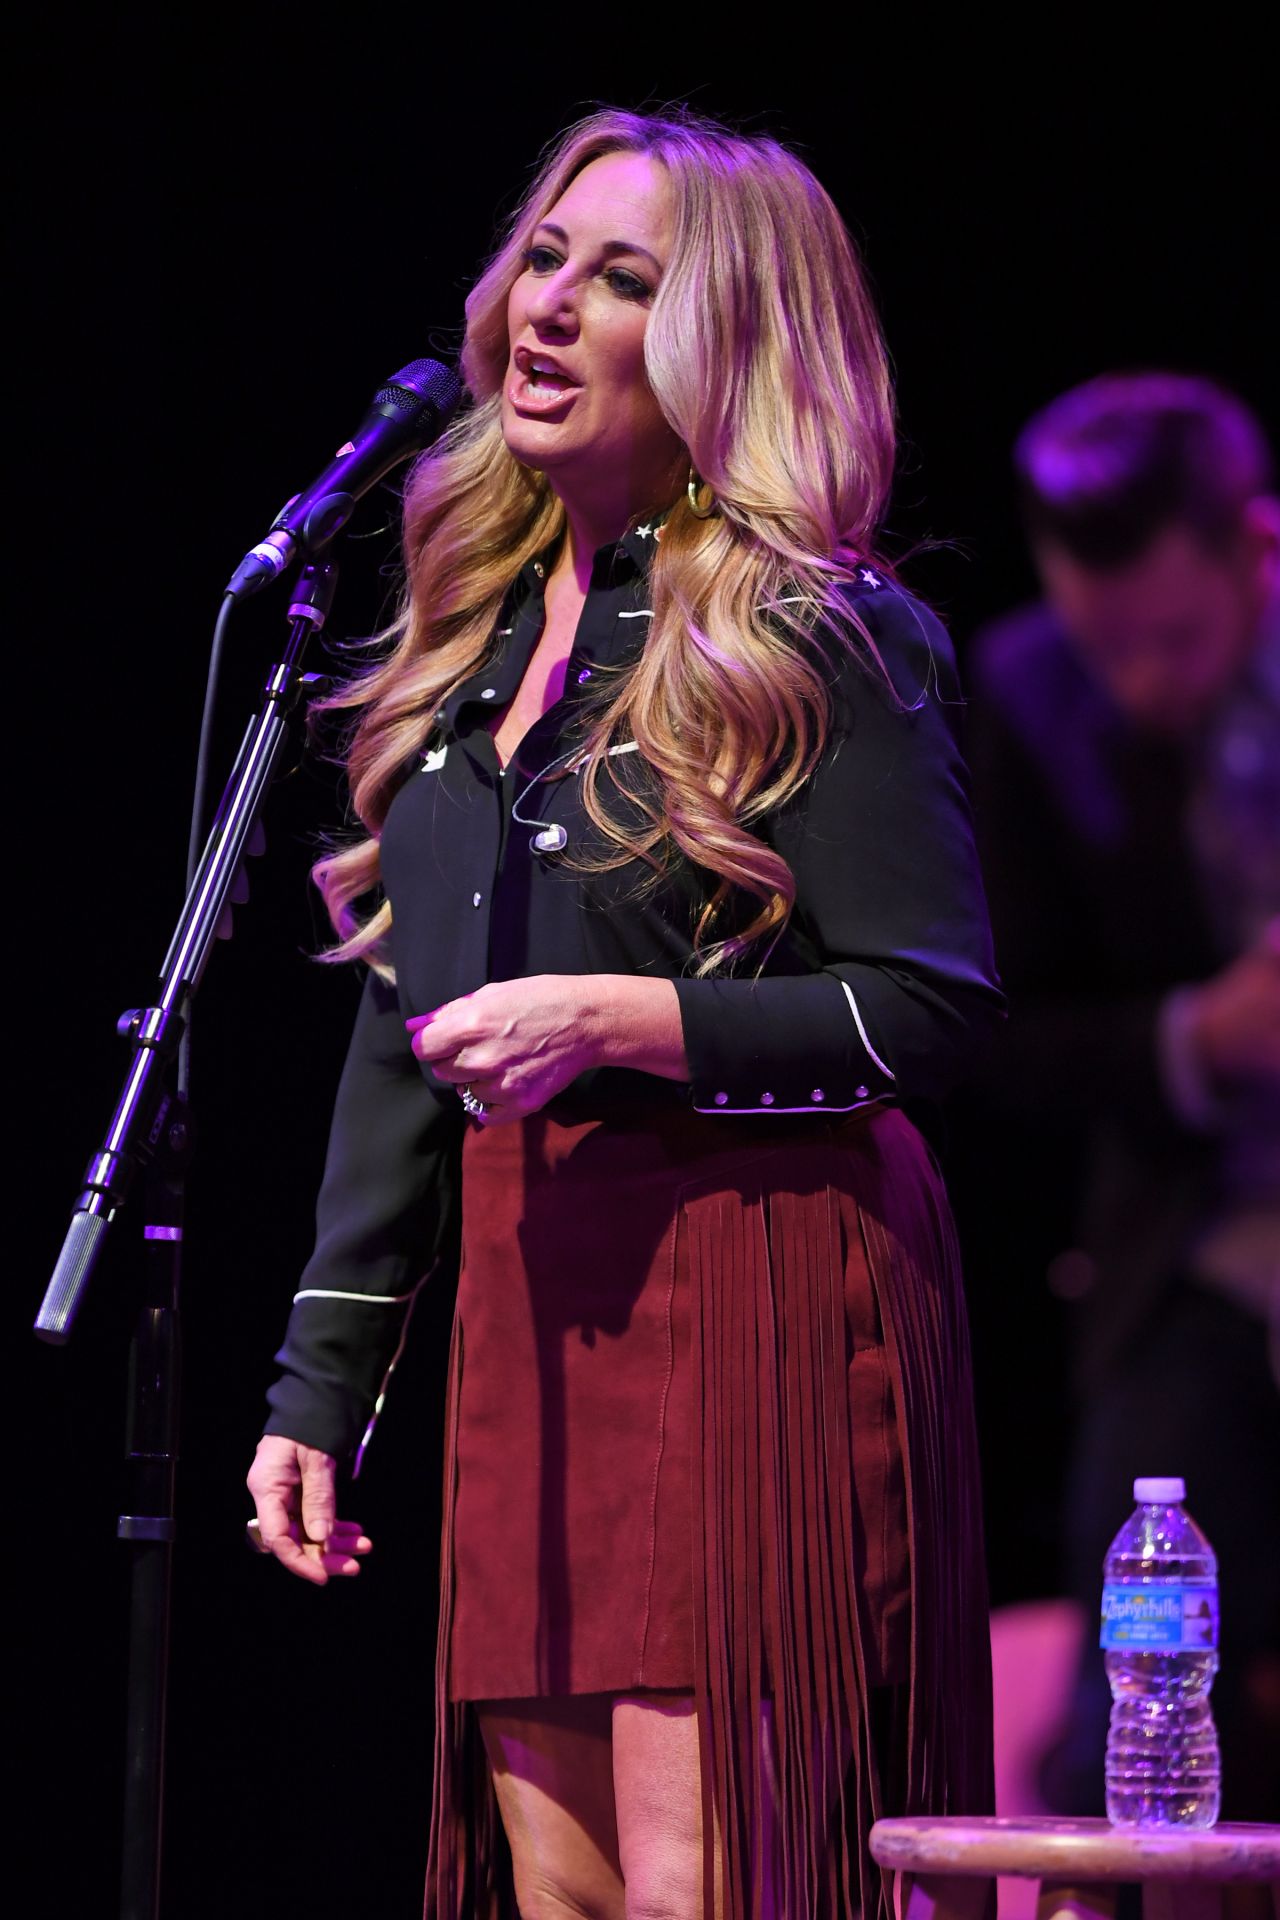 Lee Ann Womack Performs at The Broward Center in Fort Lauderdale 4/9 ...